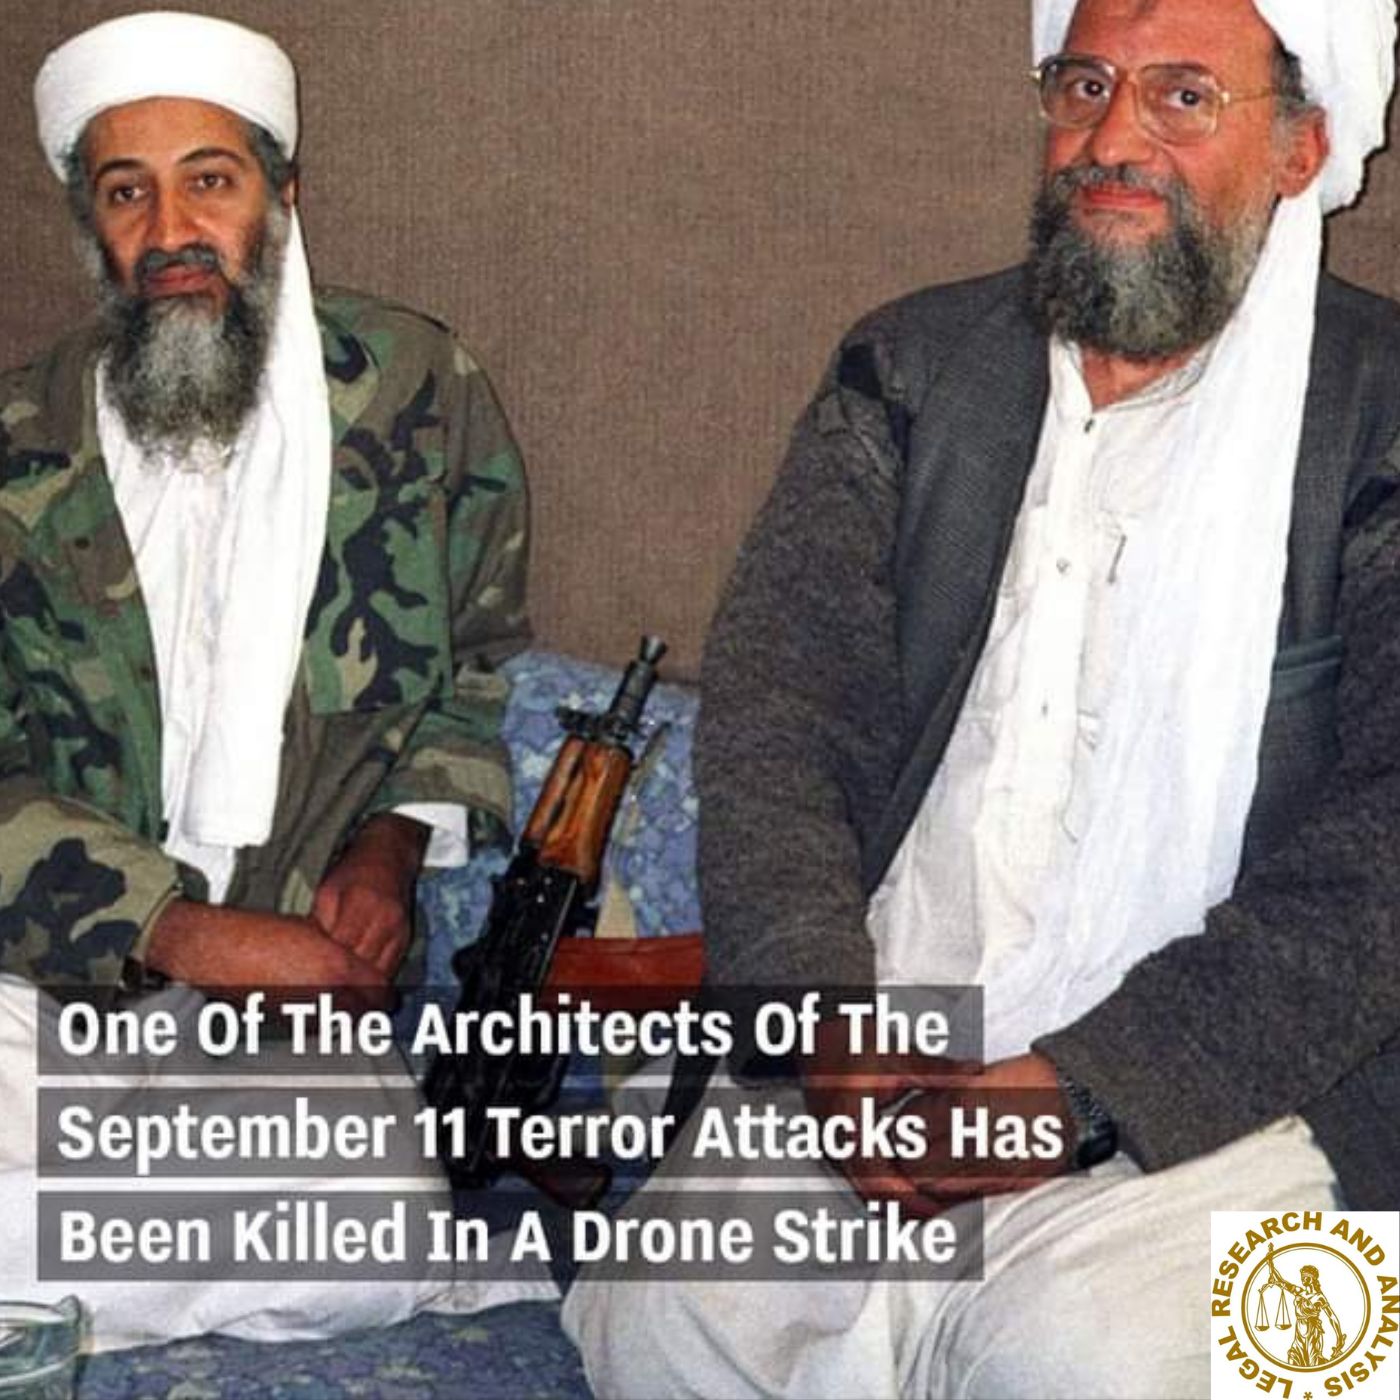 A drone strike has claimed the life of one of the planners of the September 11 terrorist attacks.